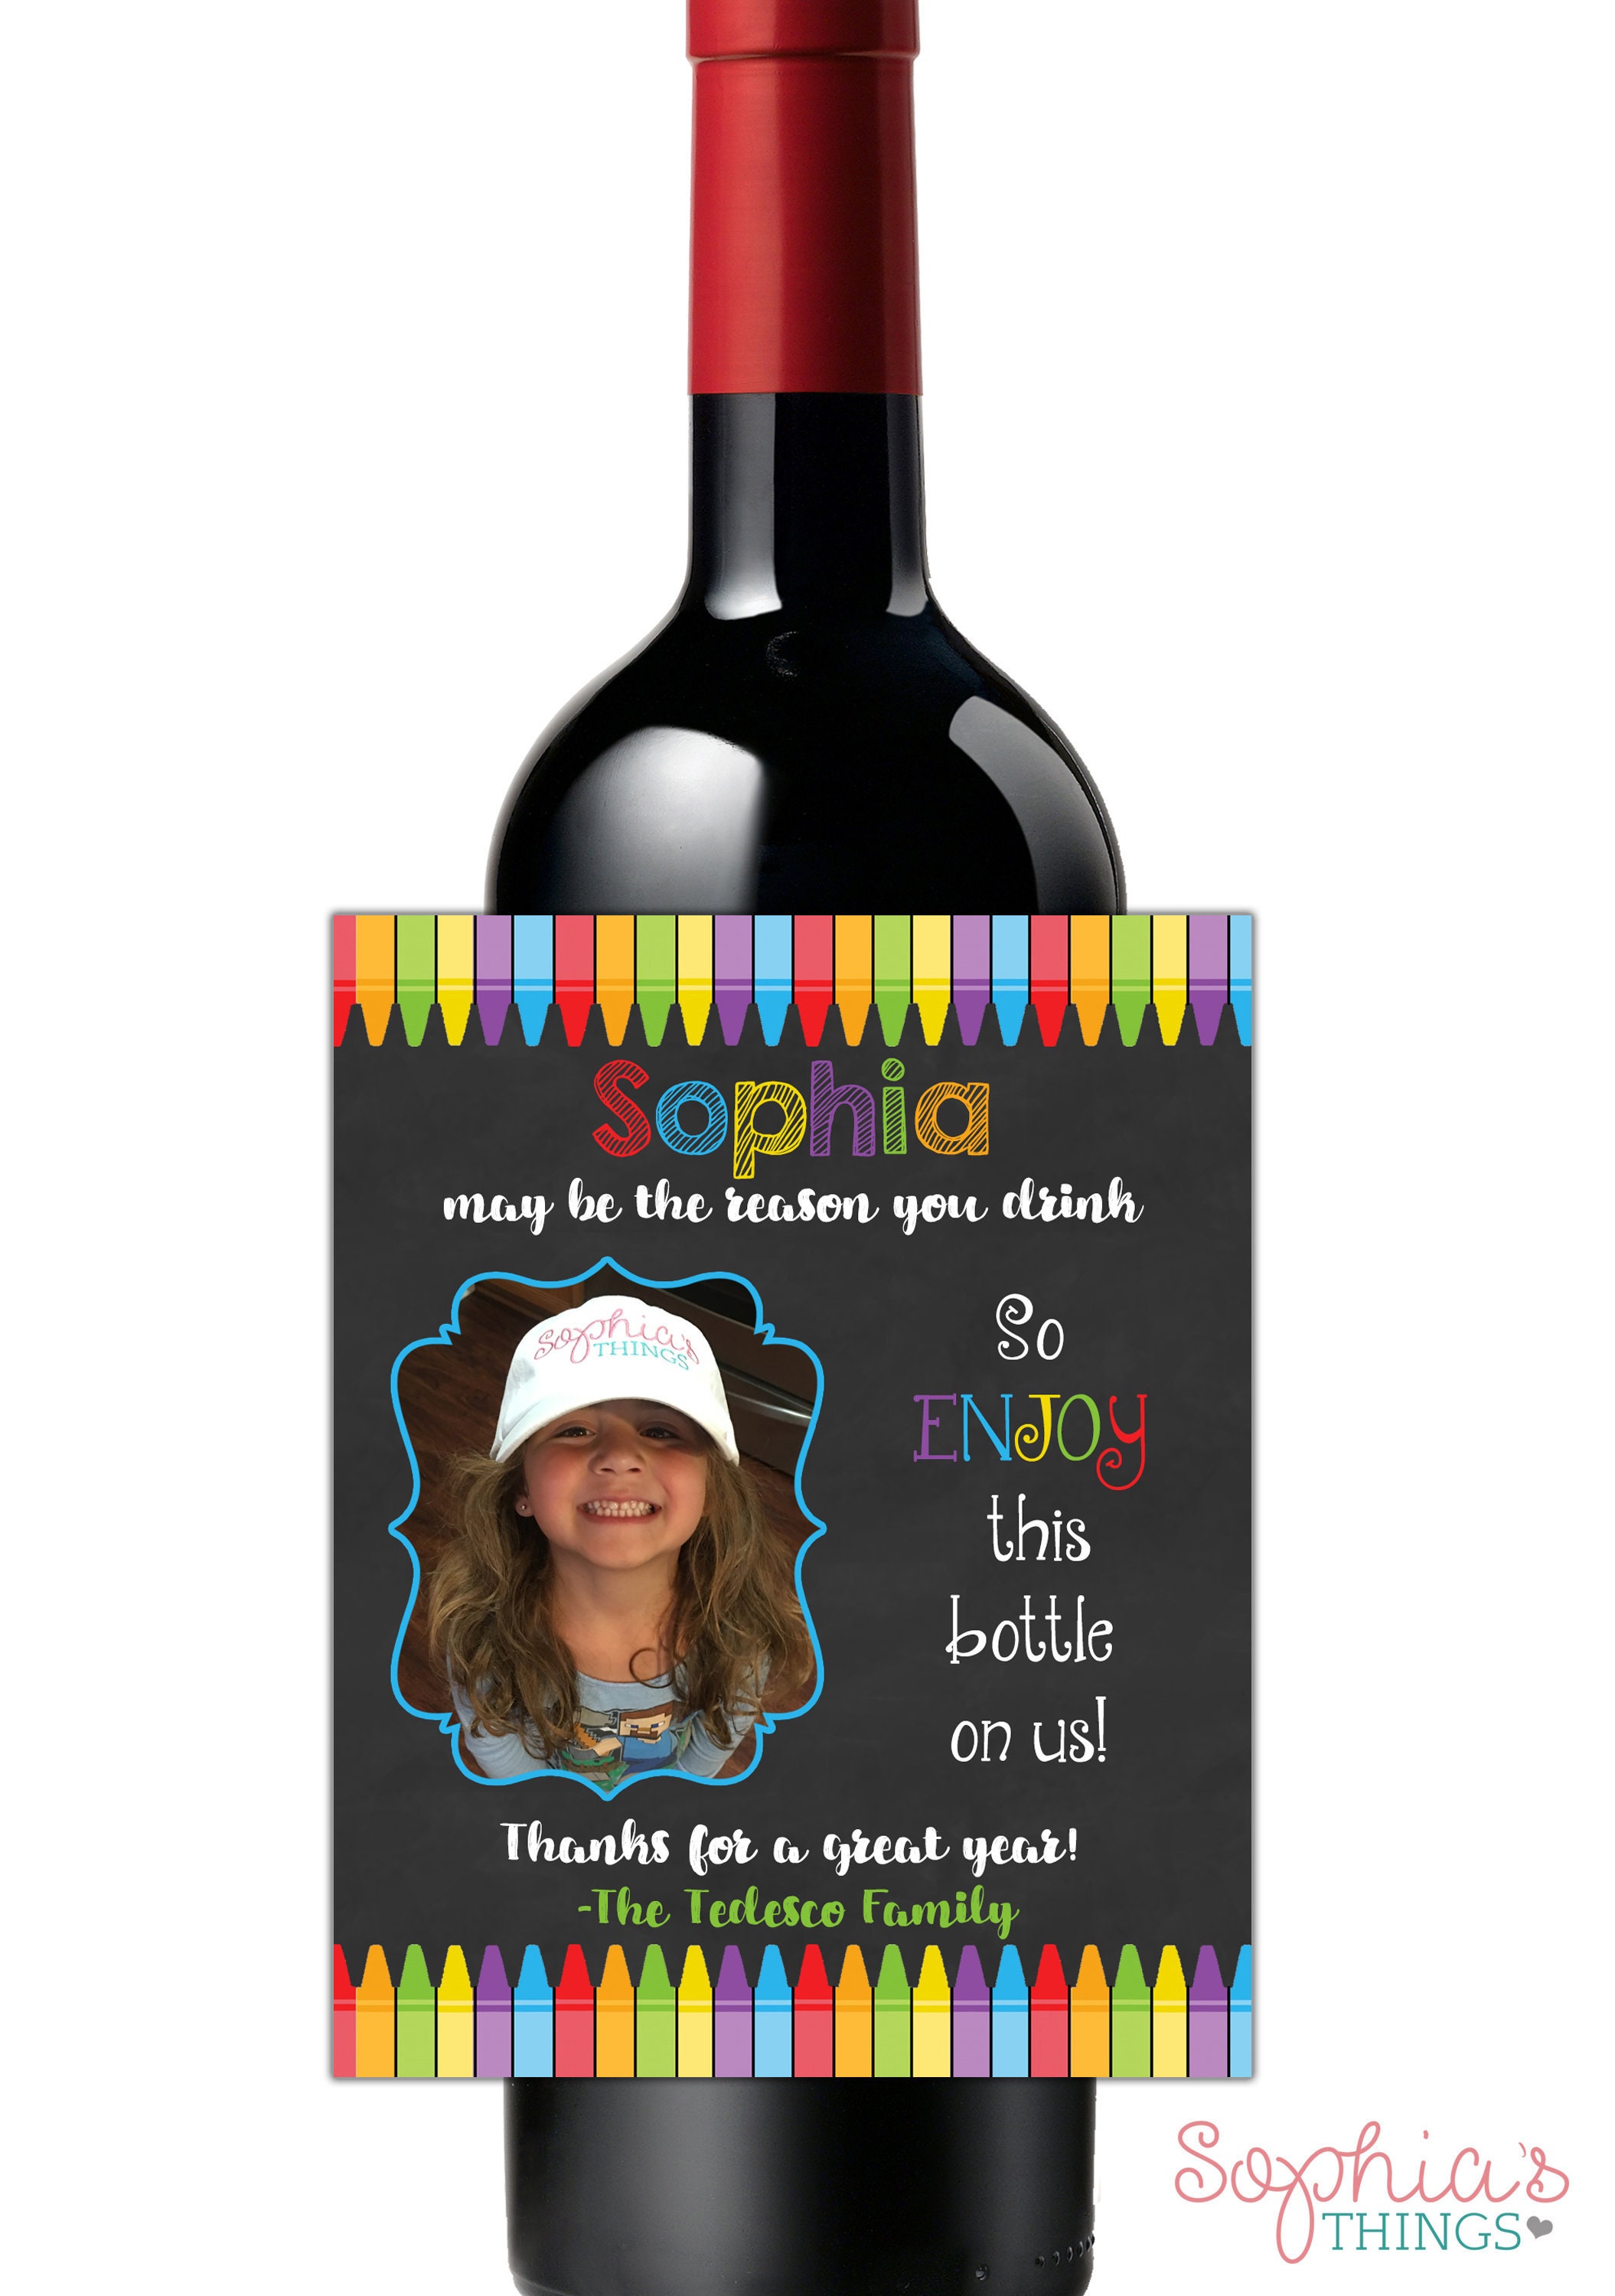 Teacher Gift / Alcohol Gift Tag / Alcohol Bottle Label 